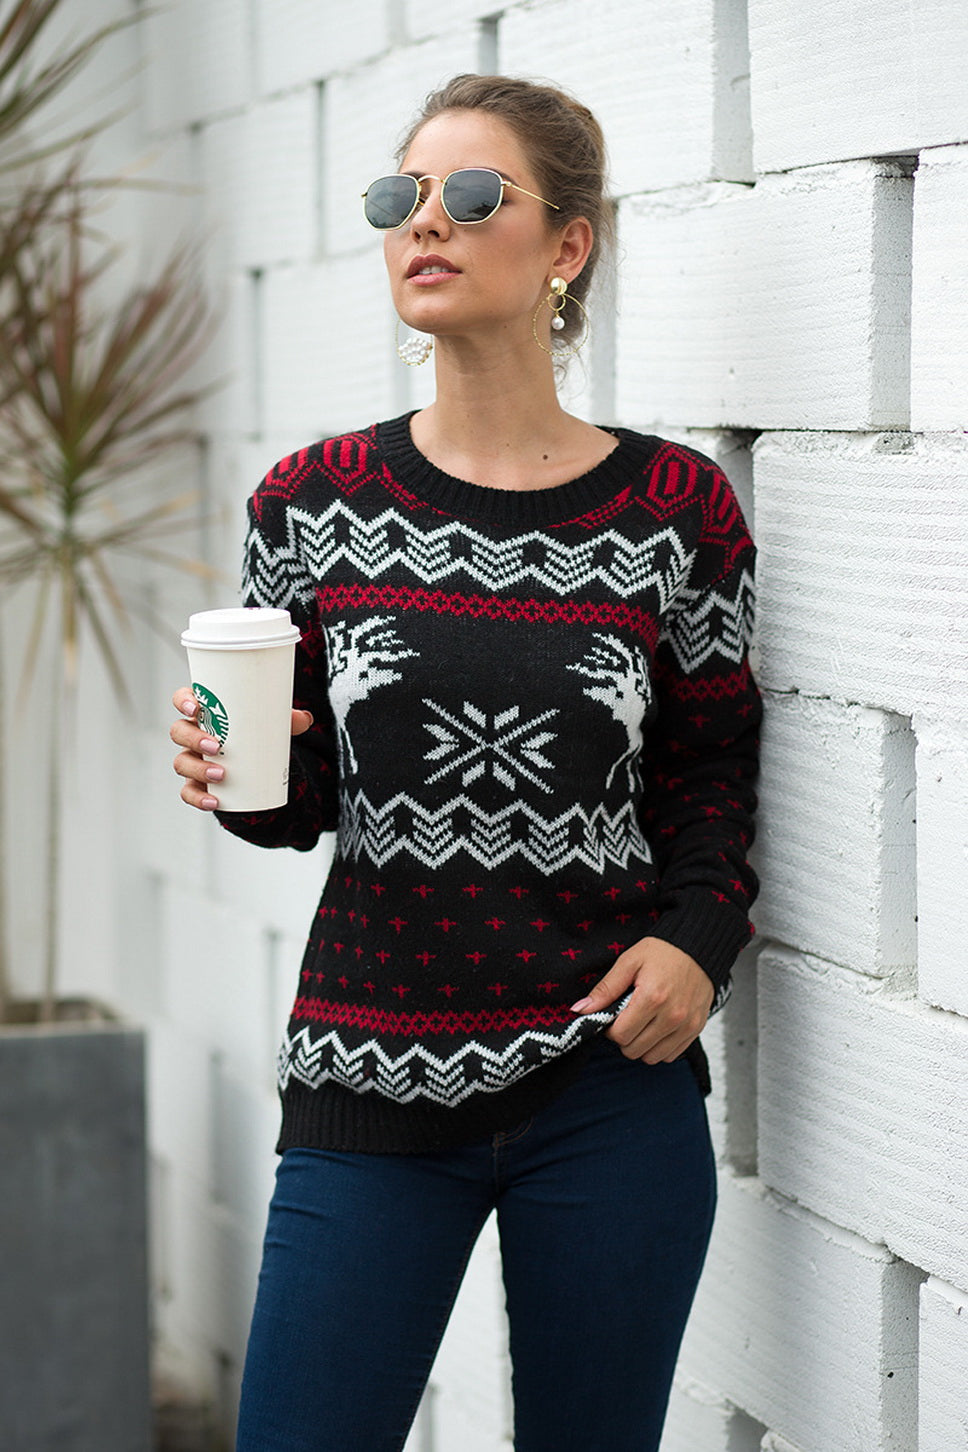 Women's Autumn/Winter Casual Knitted Sweater